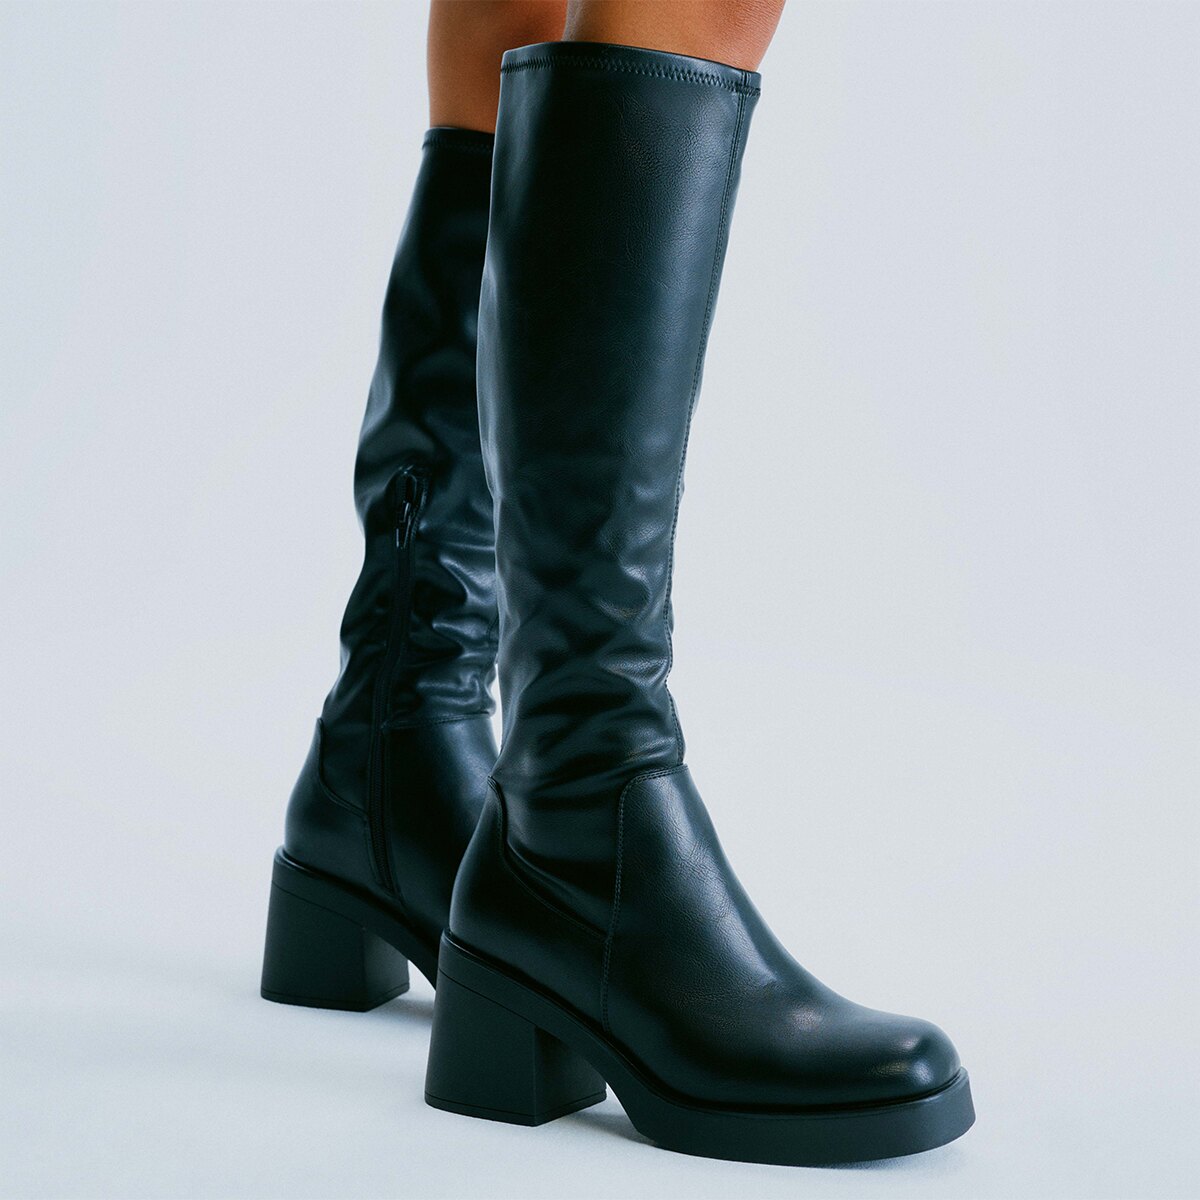 Britnay Black Women's Knee-high Boots | Call It Spring US